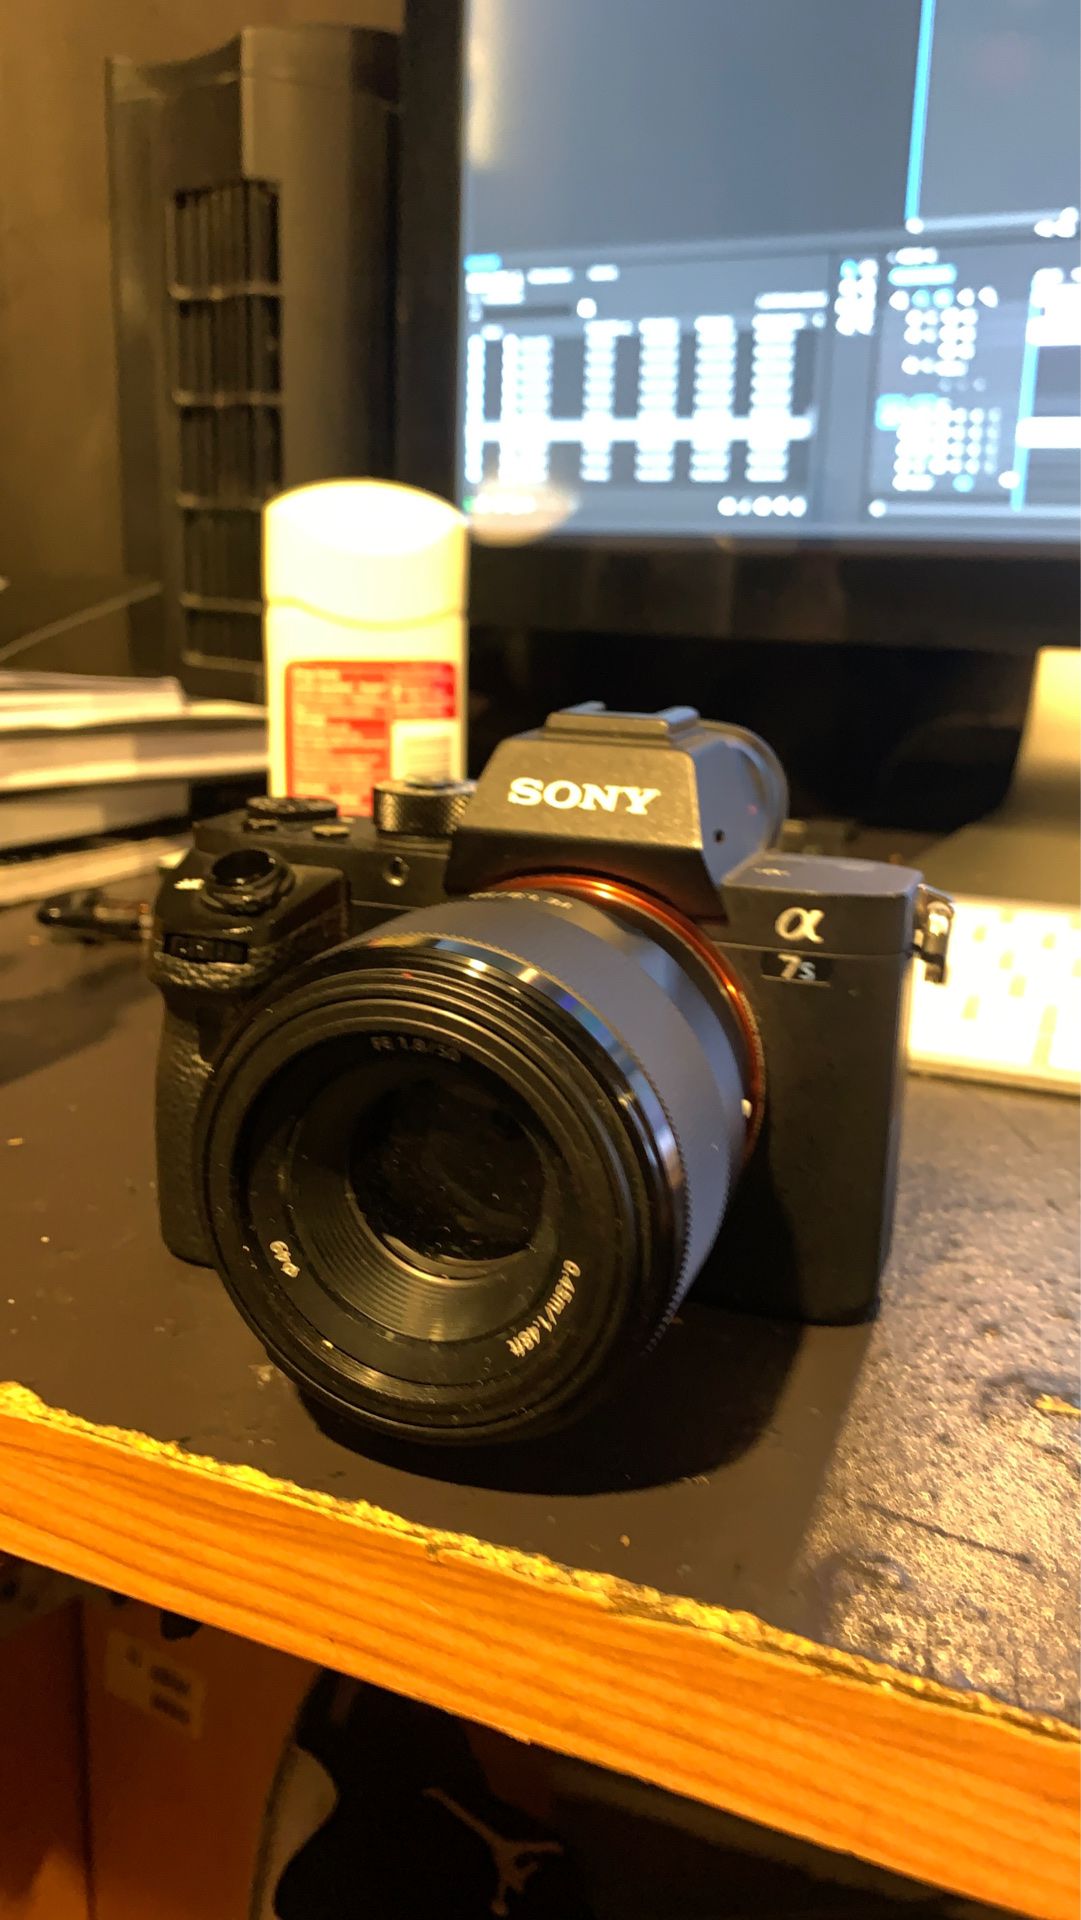 Sony a7sii with kit lens